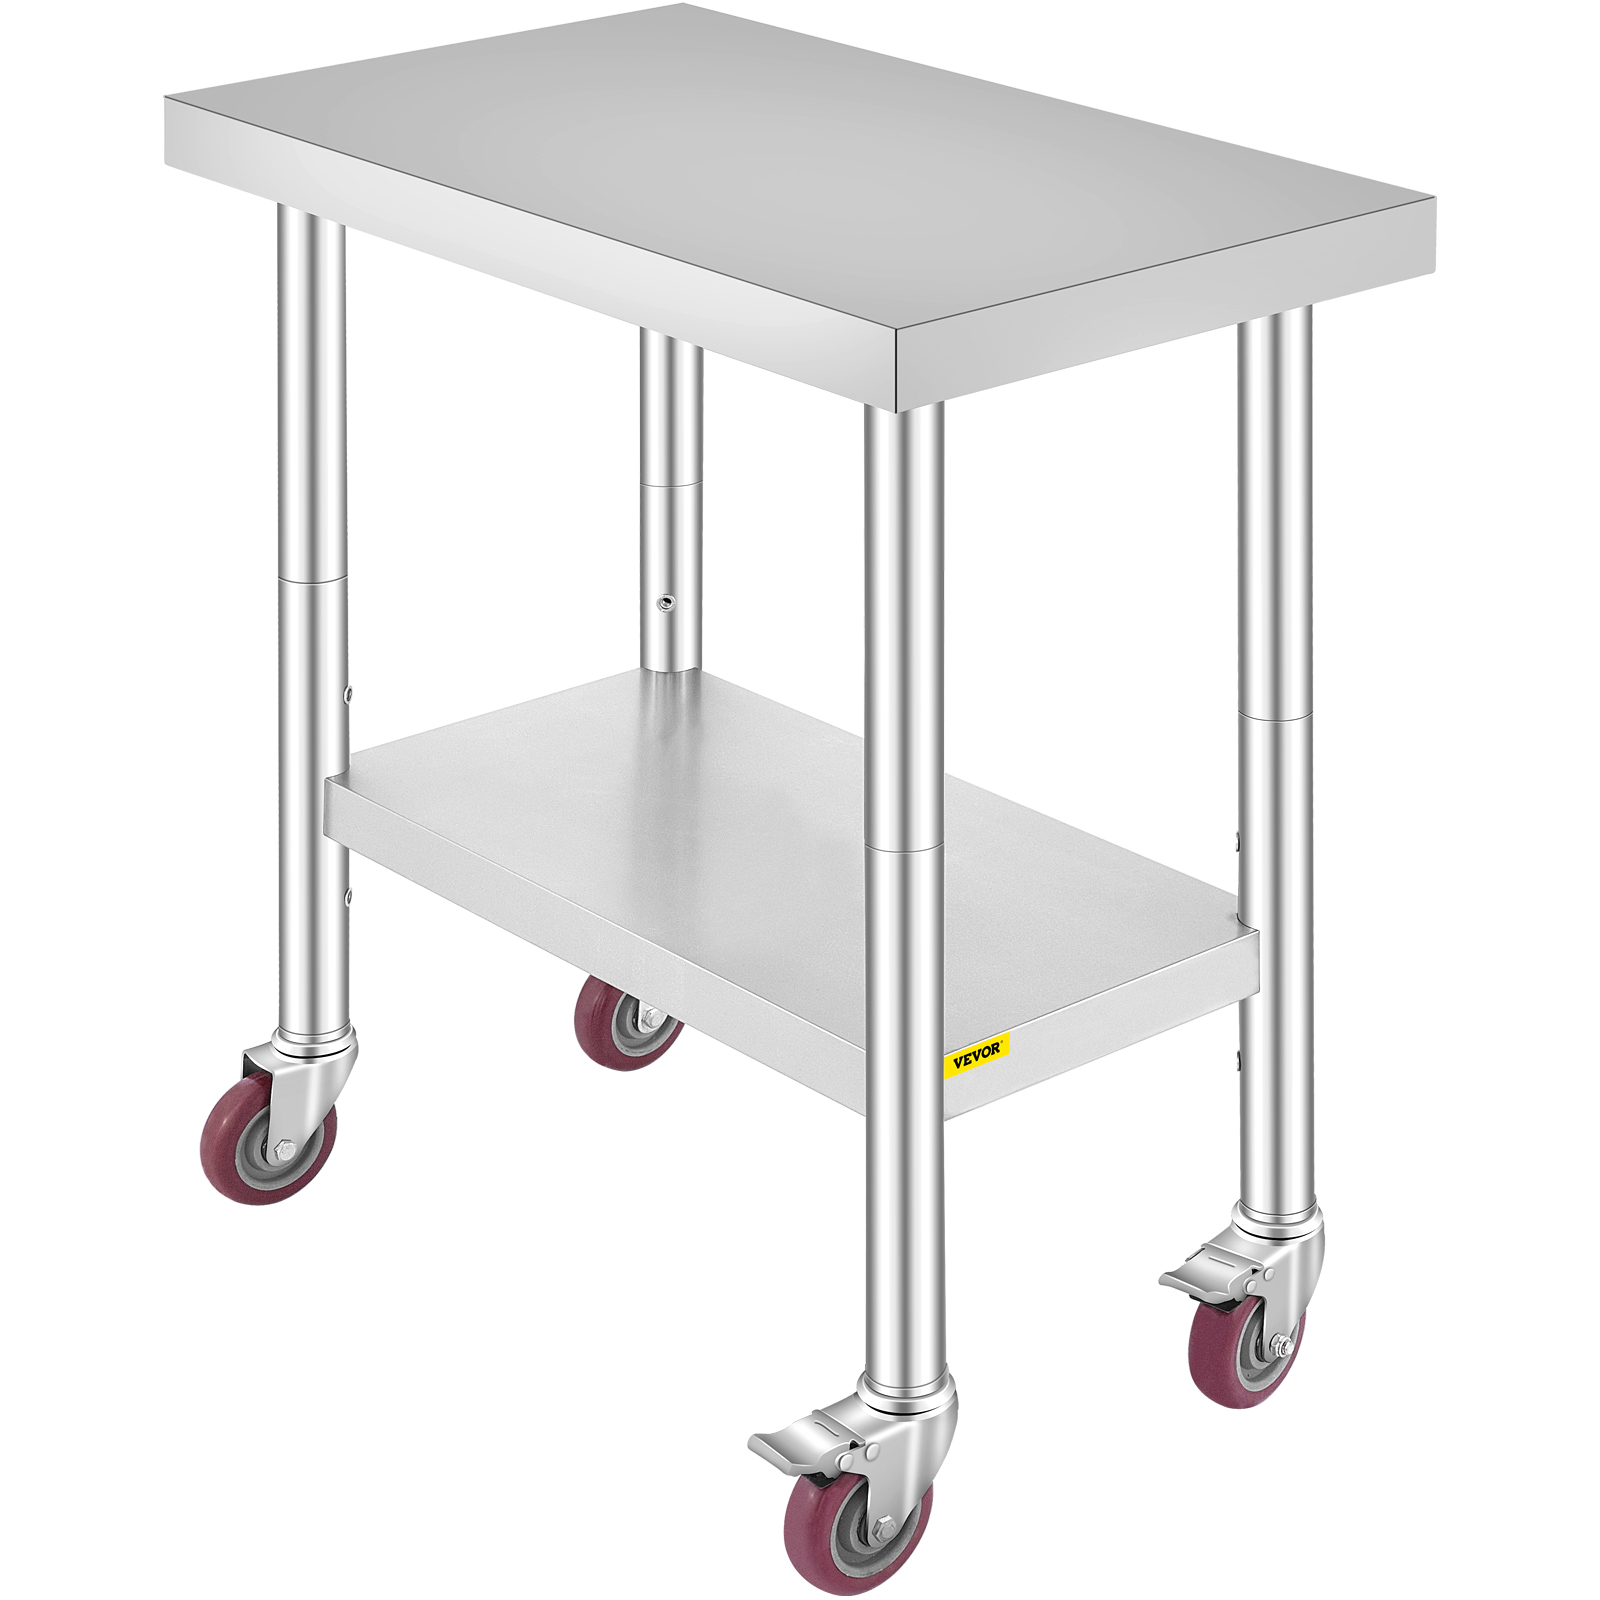 30"x18" Kitchen Work Table With Wheels Shelving Rolling Adjustable Undershelf от Vevor Many GEOs